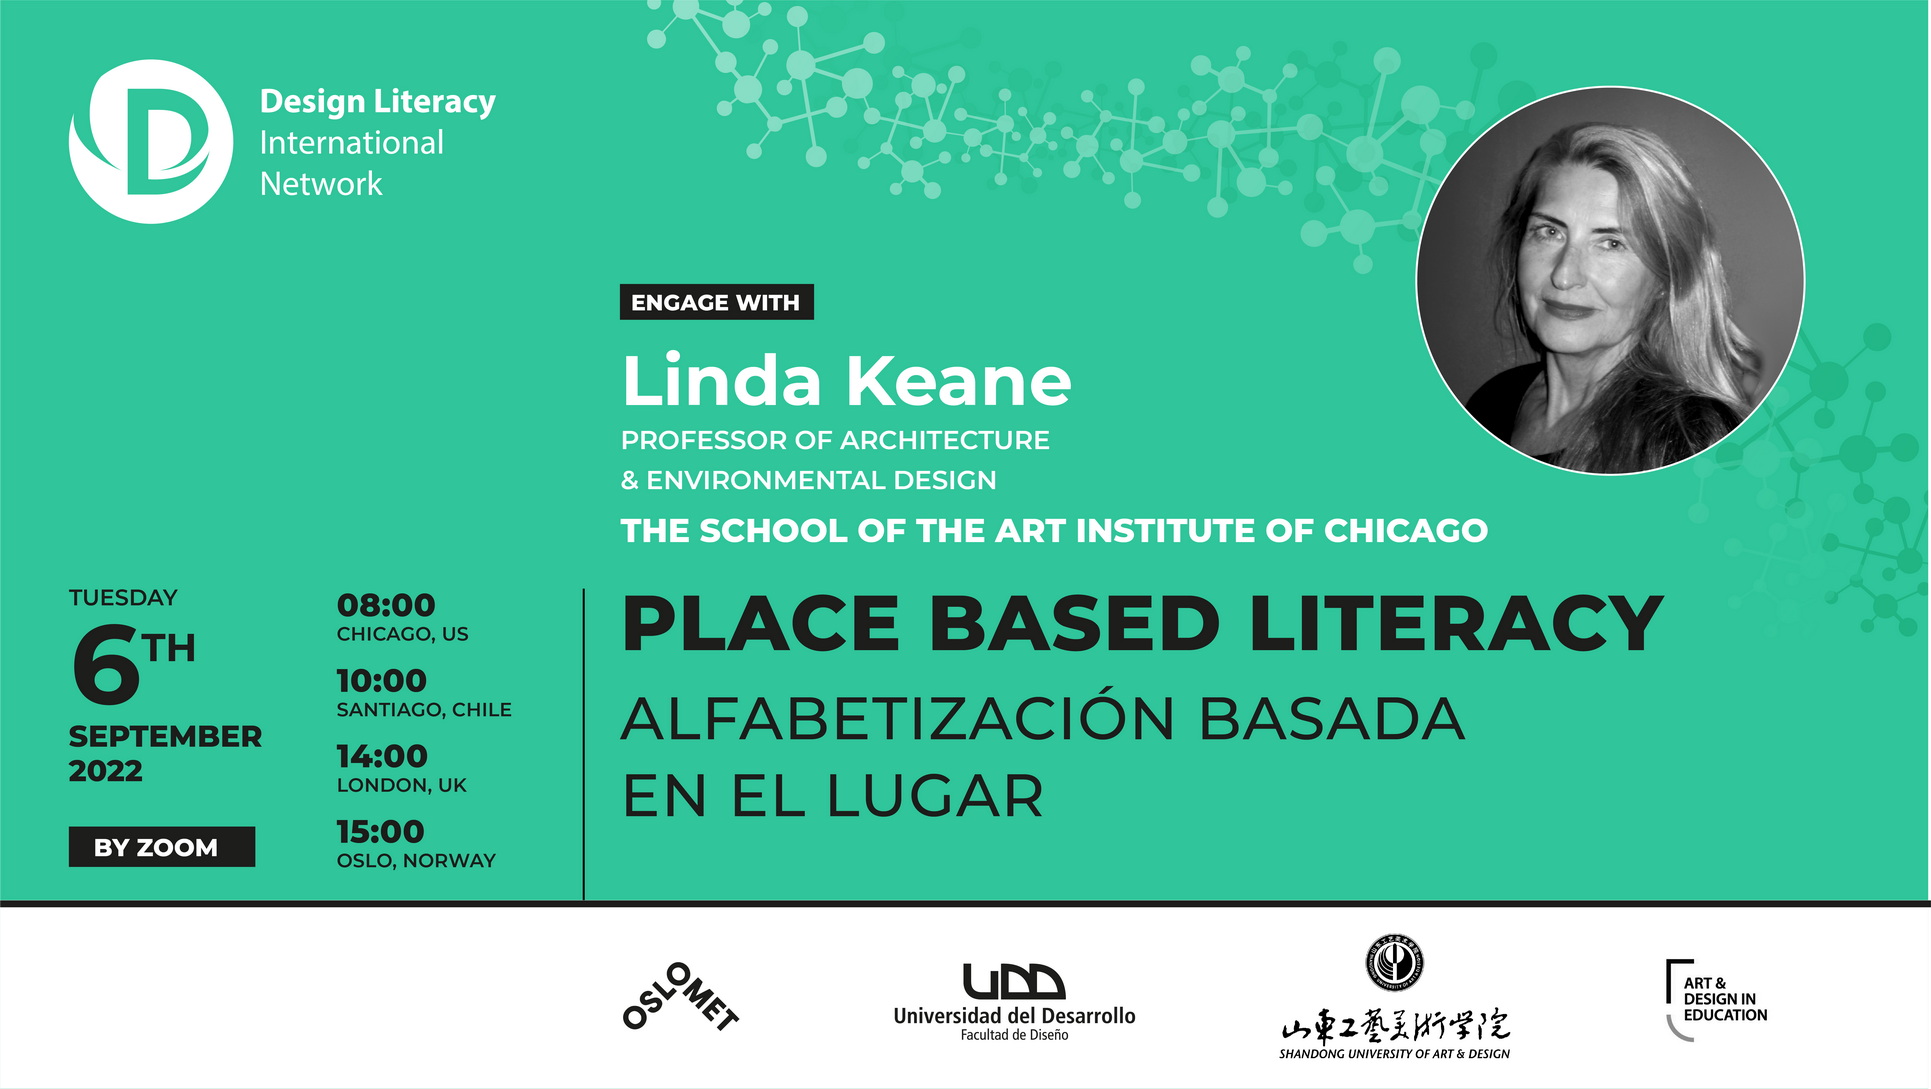 You are currently viewing Engage with Linda Keane | Place Based Literacy | 21st Design Literacy International Network event